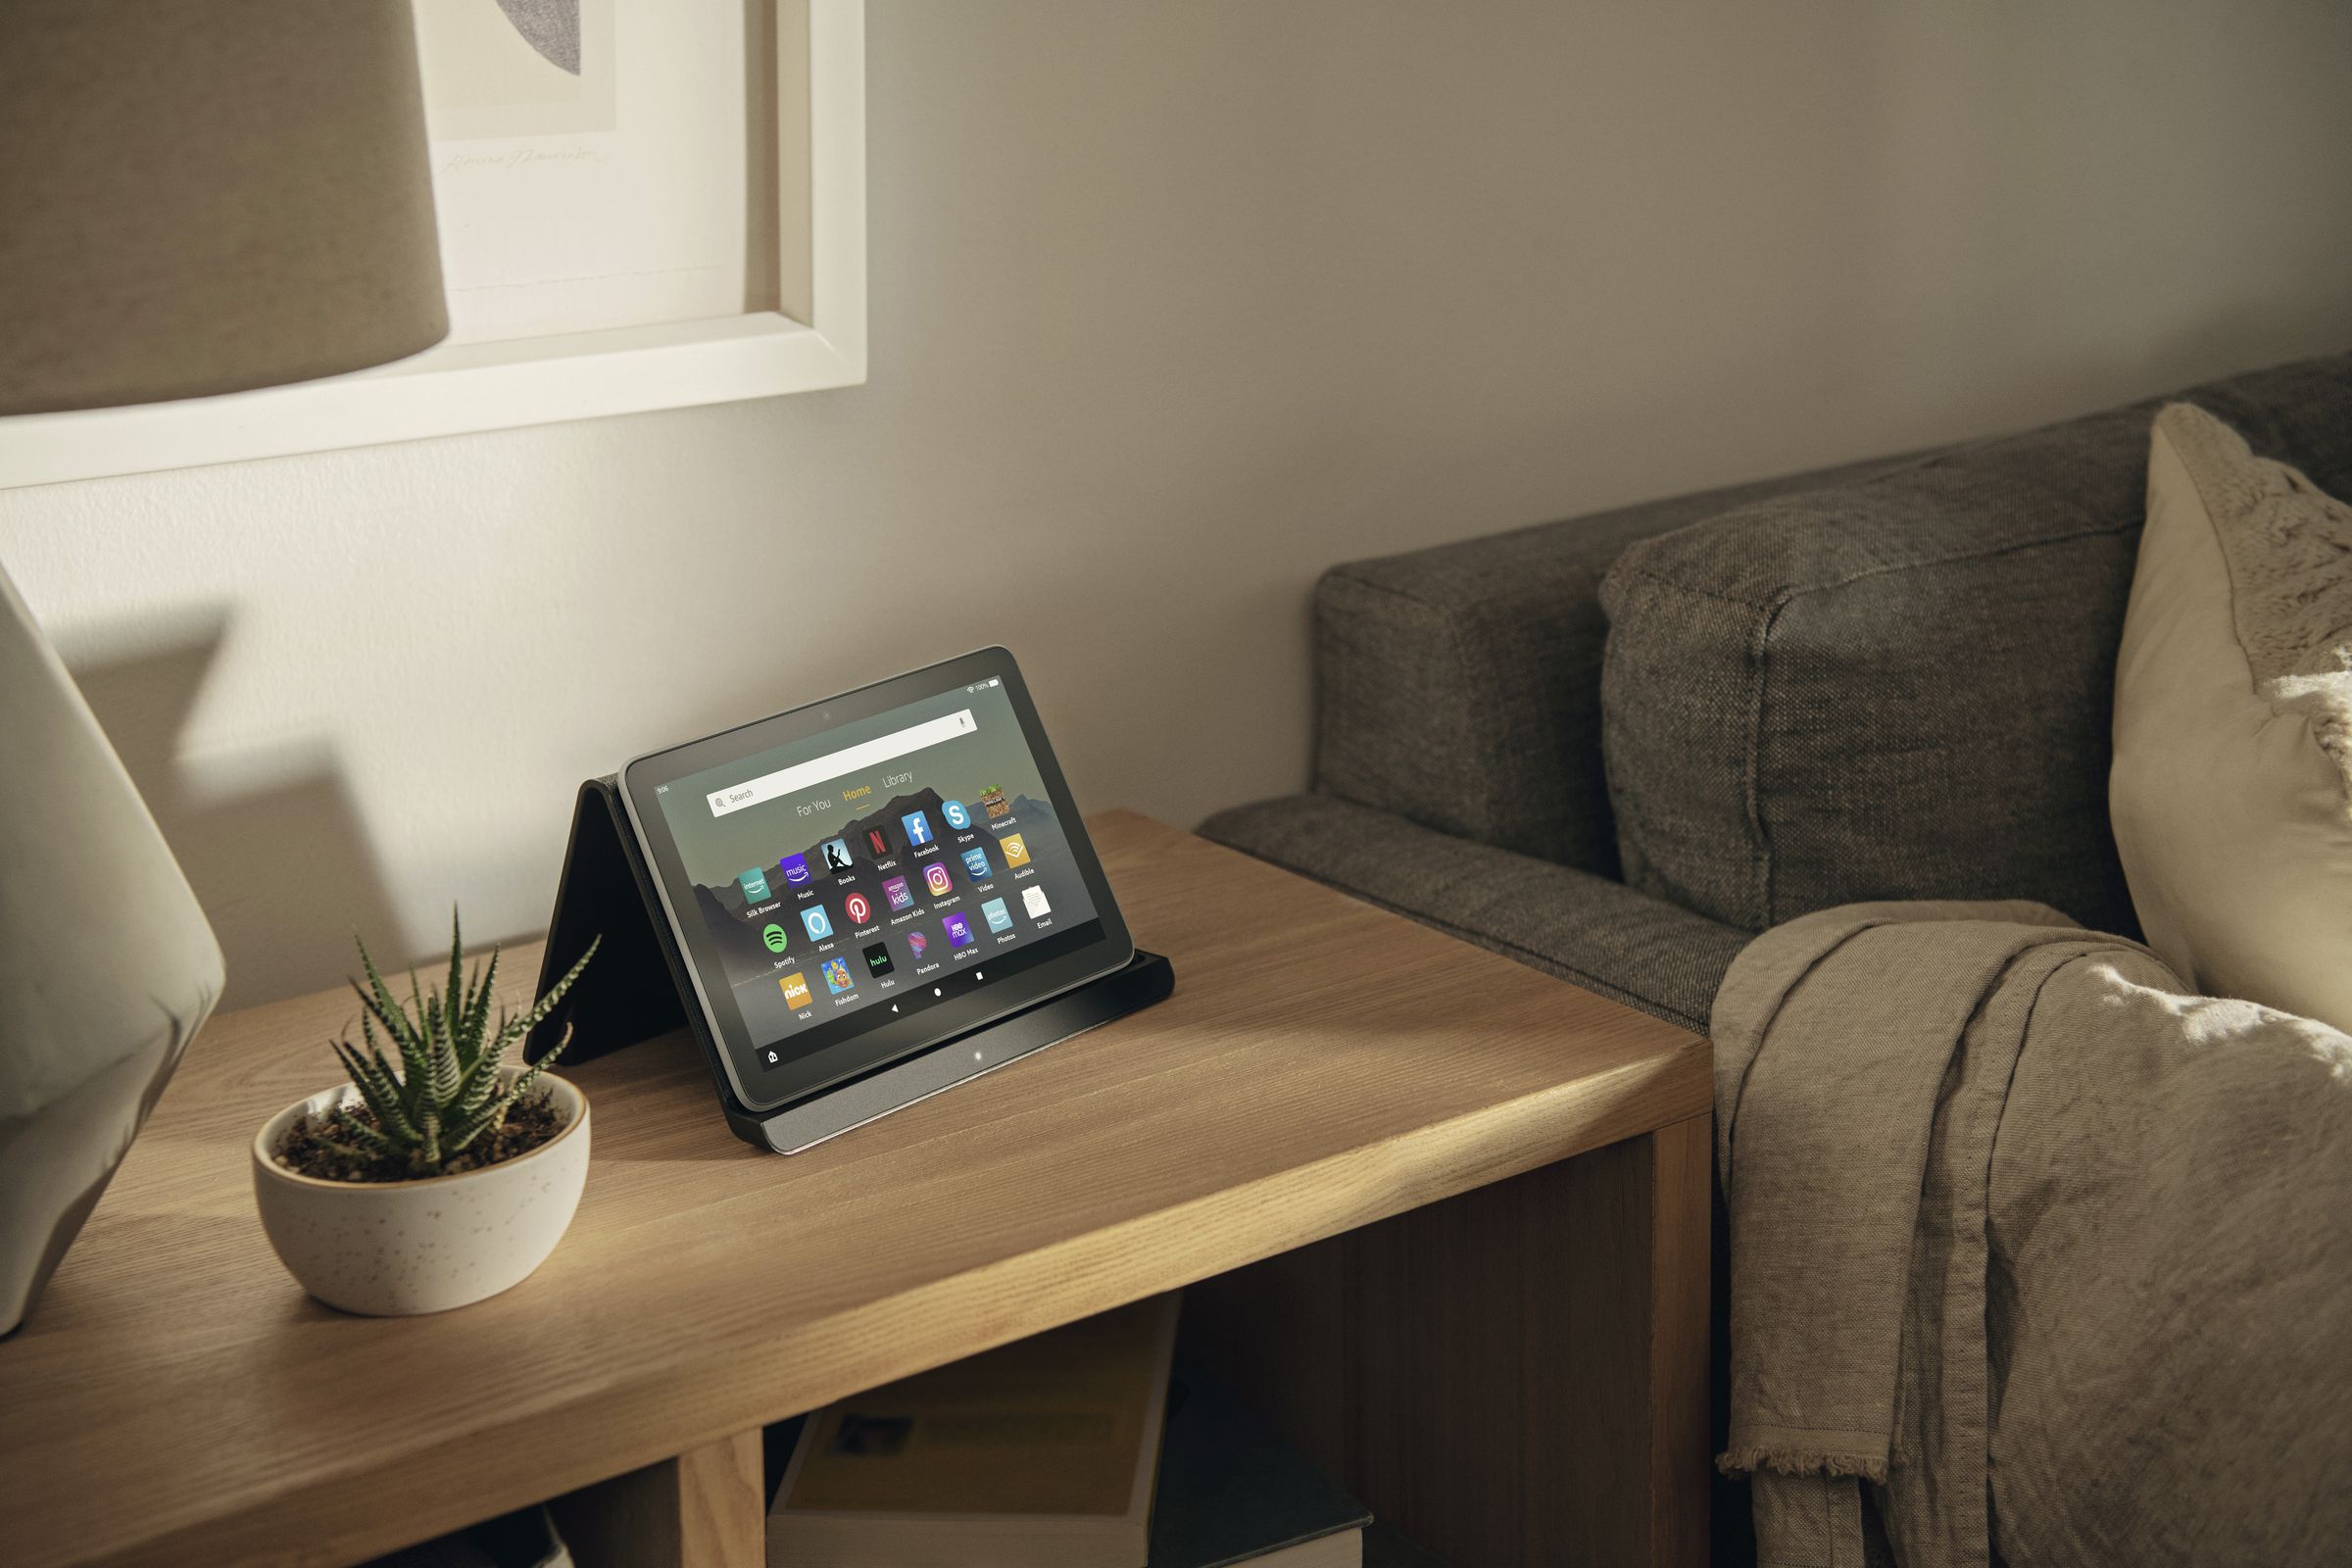 Tablet on a table in a living room